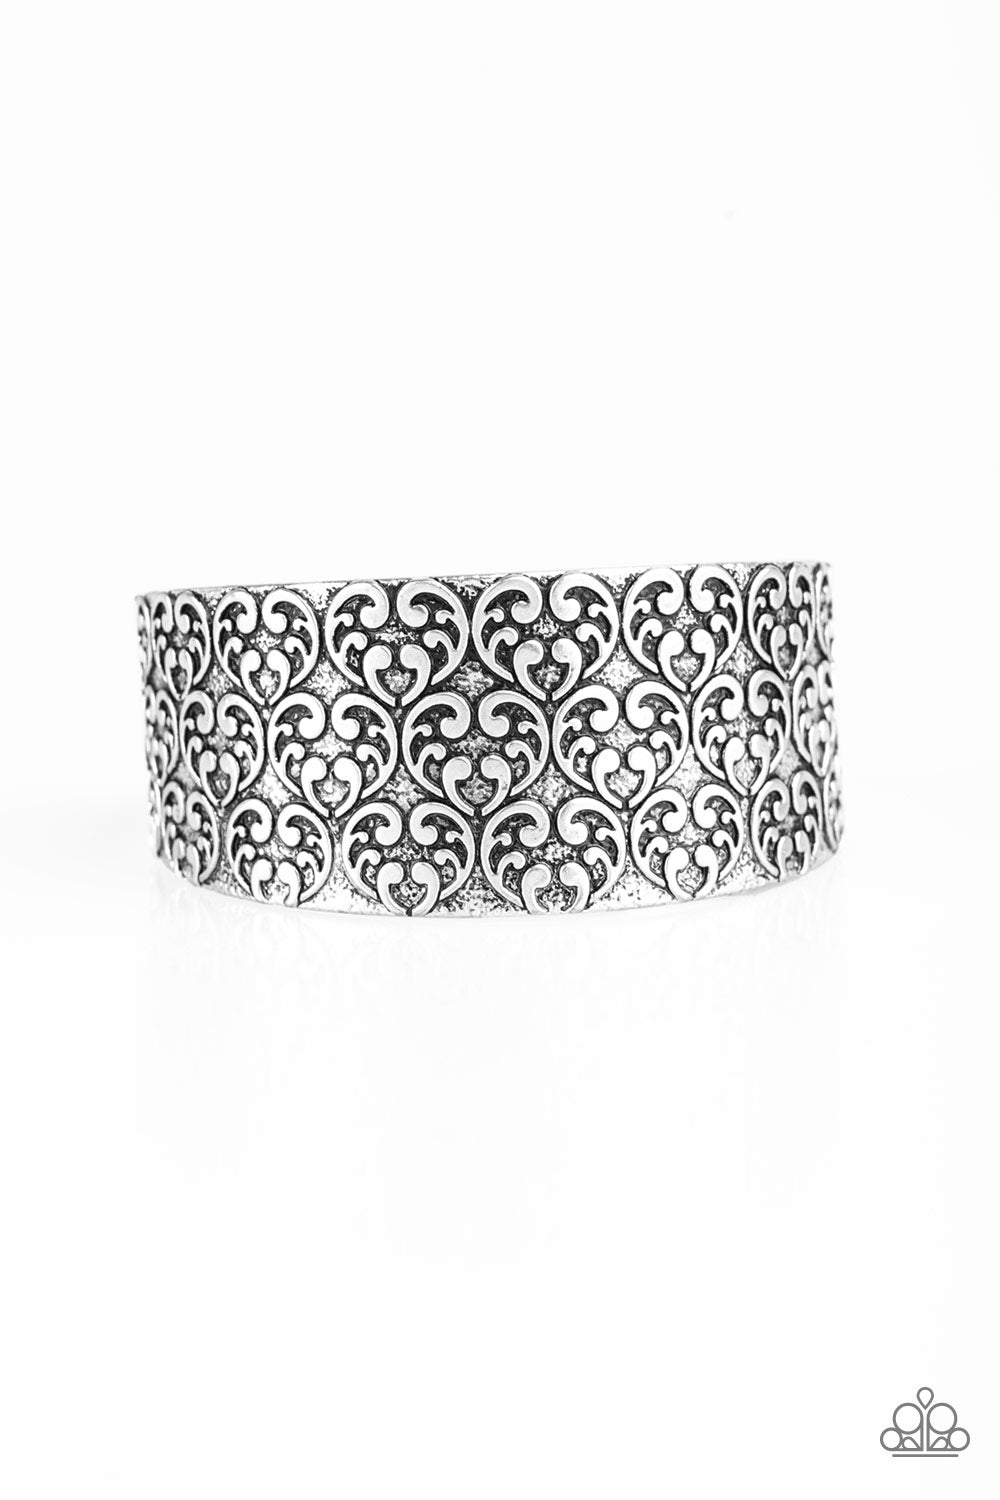 EAT YOUR HEART OUT - SILVER HEARTS FILIGREE CUFF BRACELET